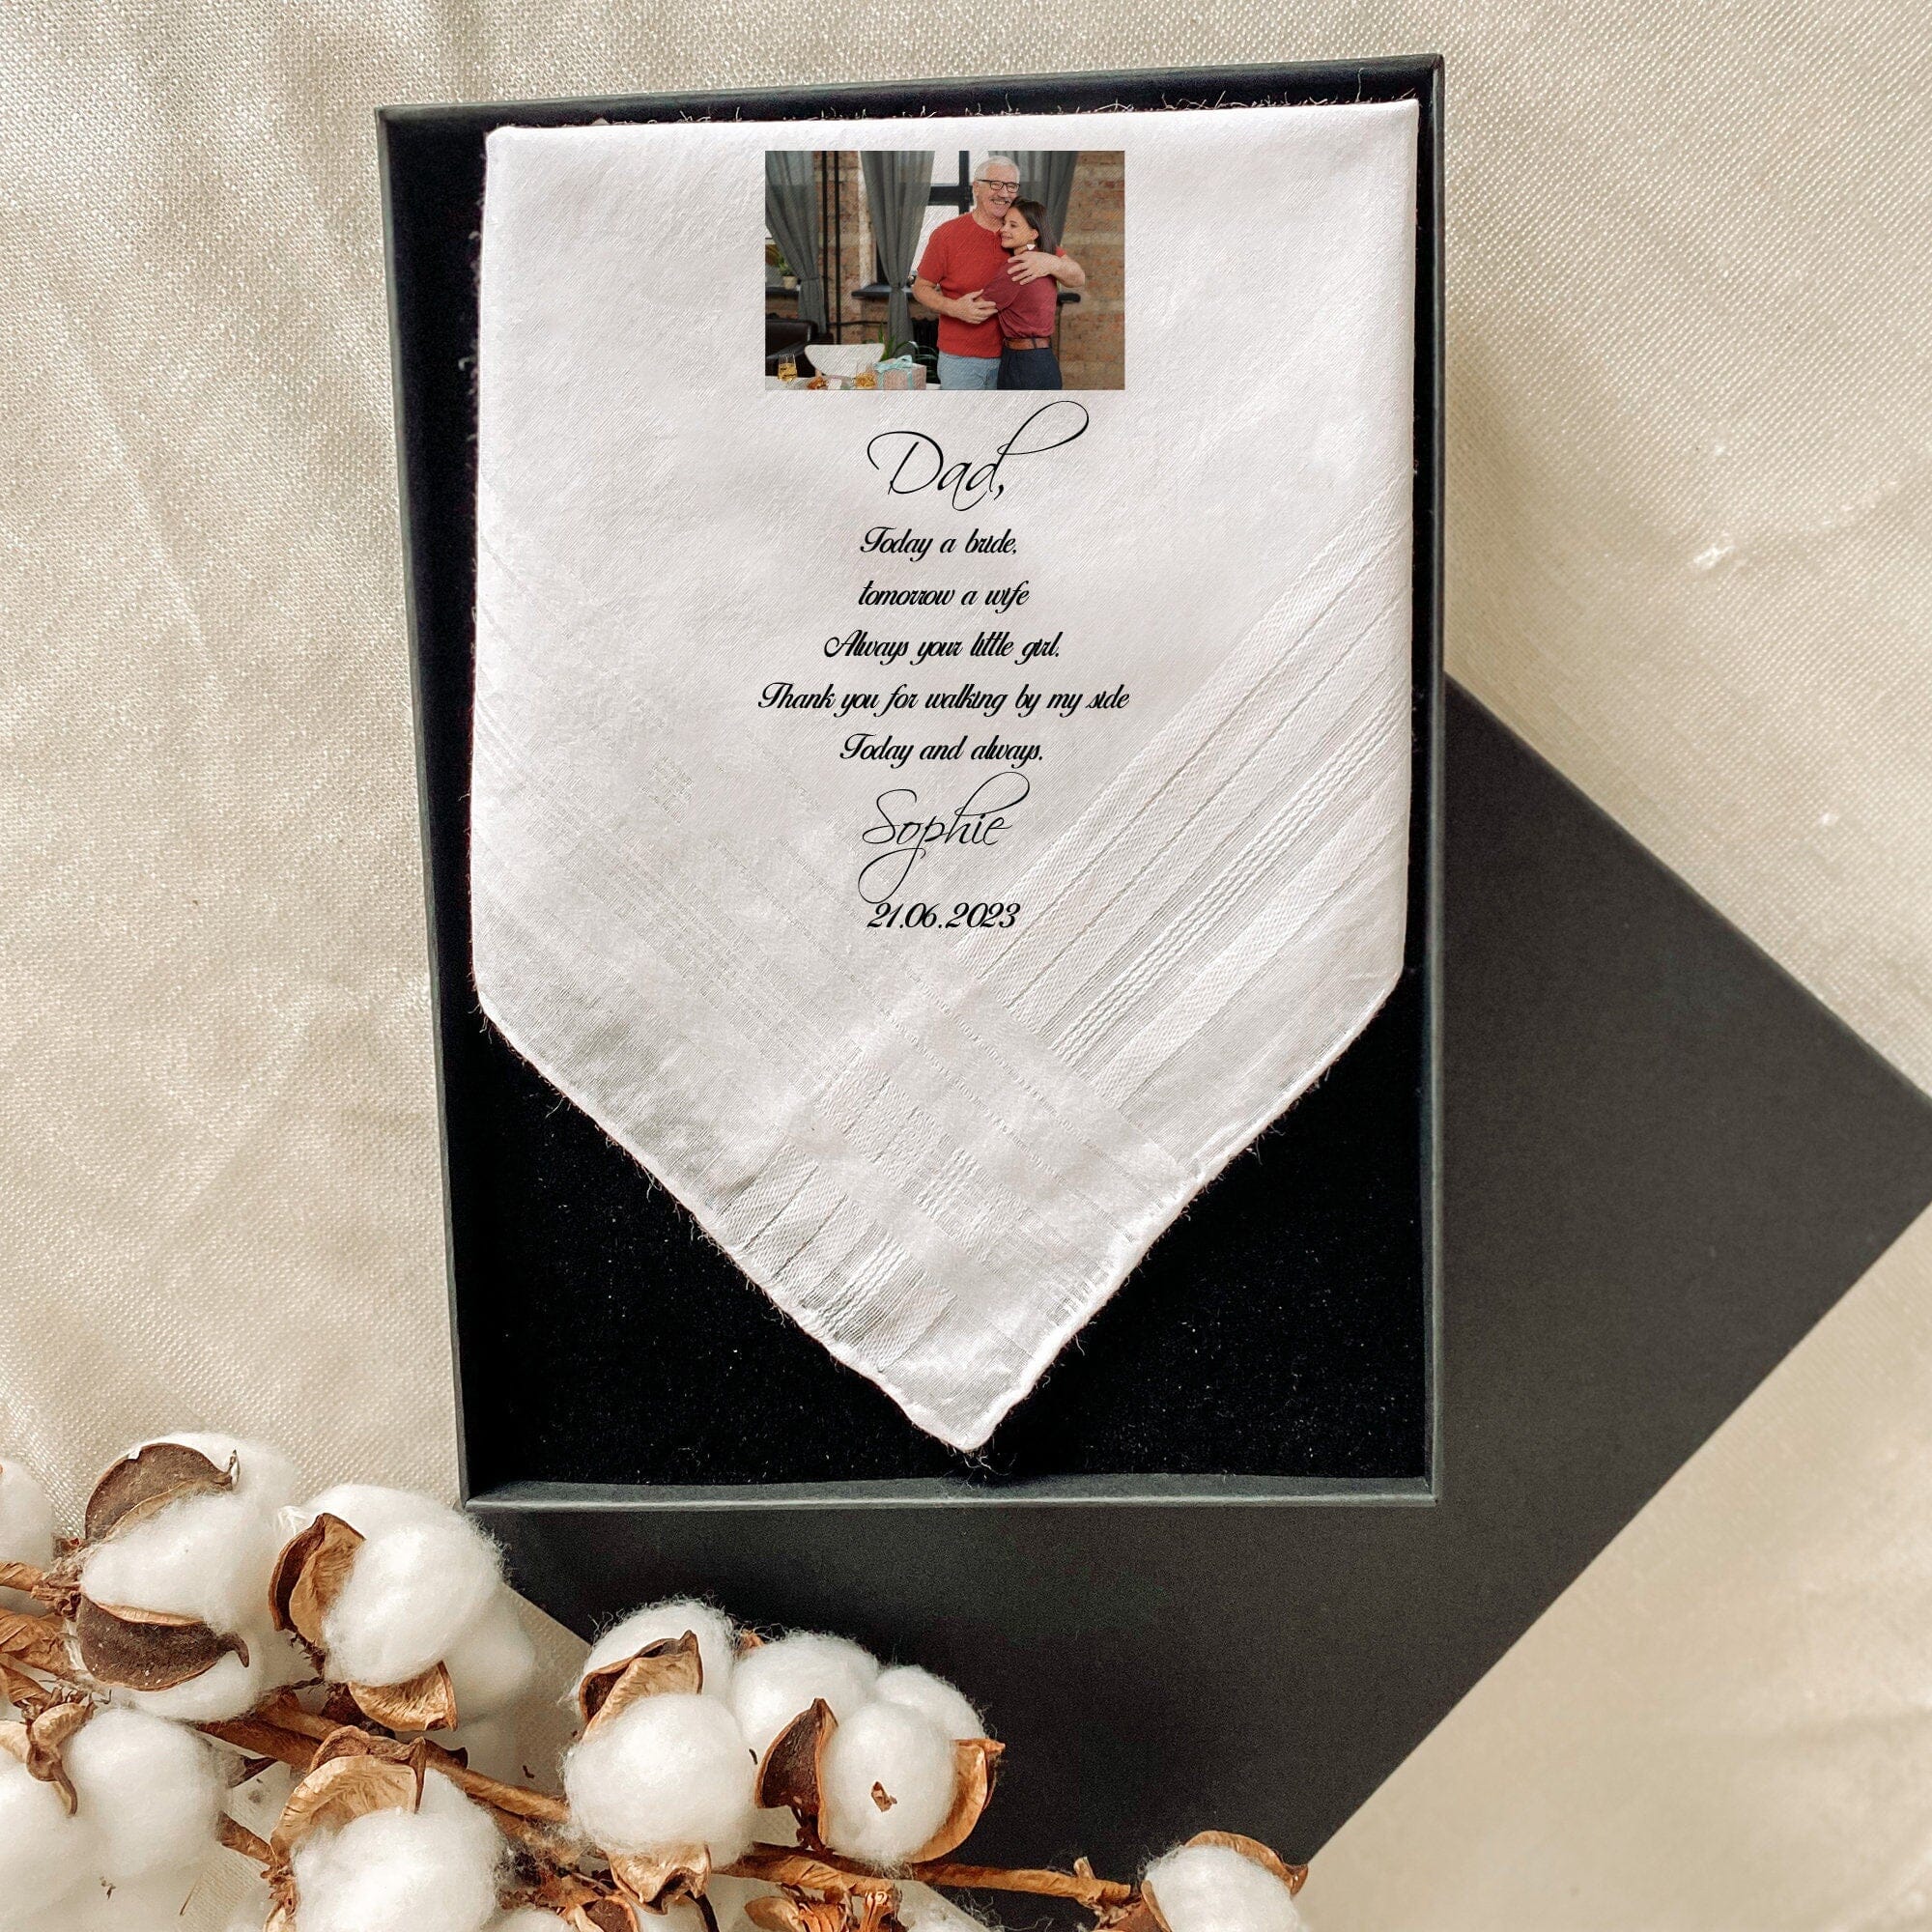 Personalised Wedding Gift For Parents With Mum Dad Photo, Wedding Handkerchief